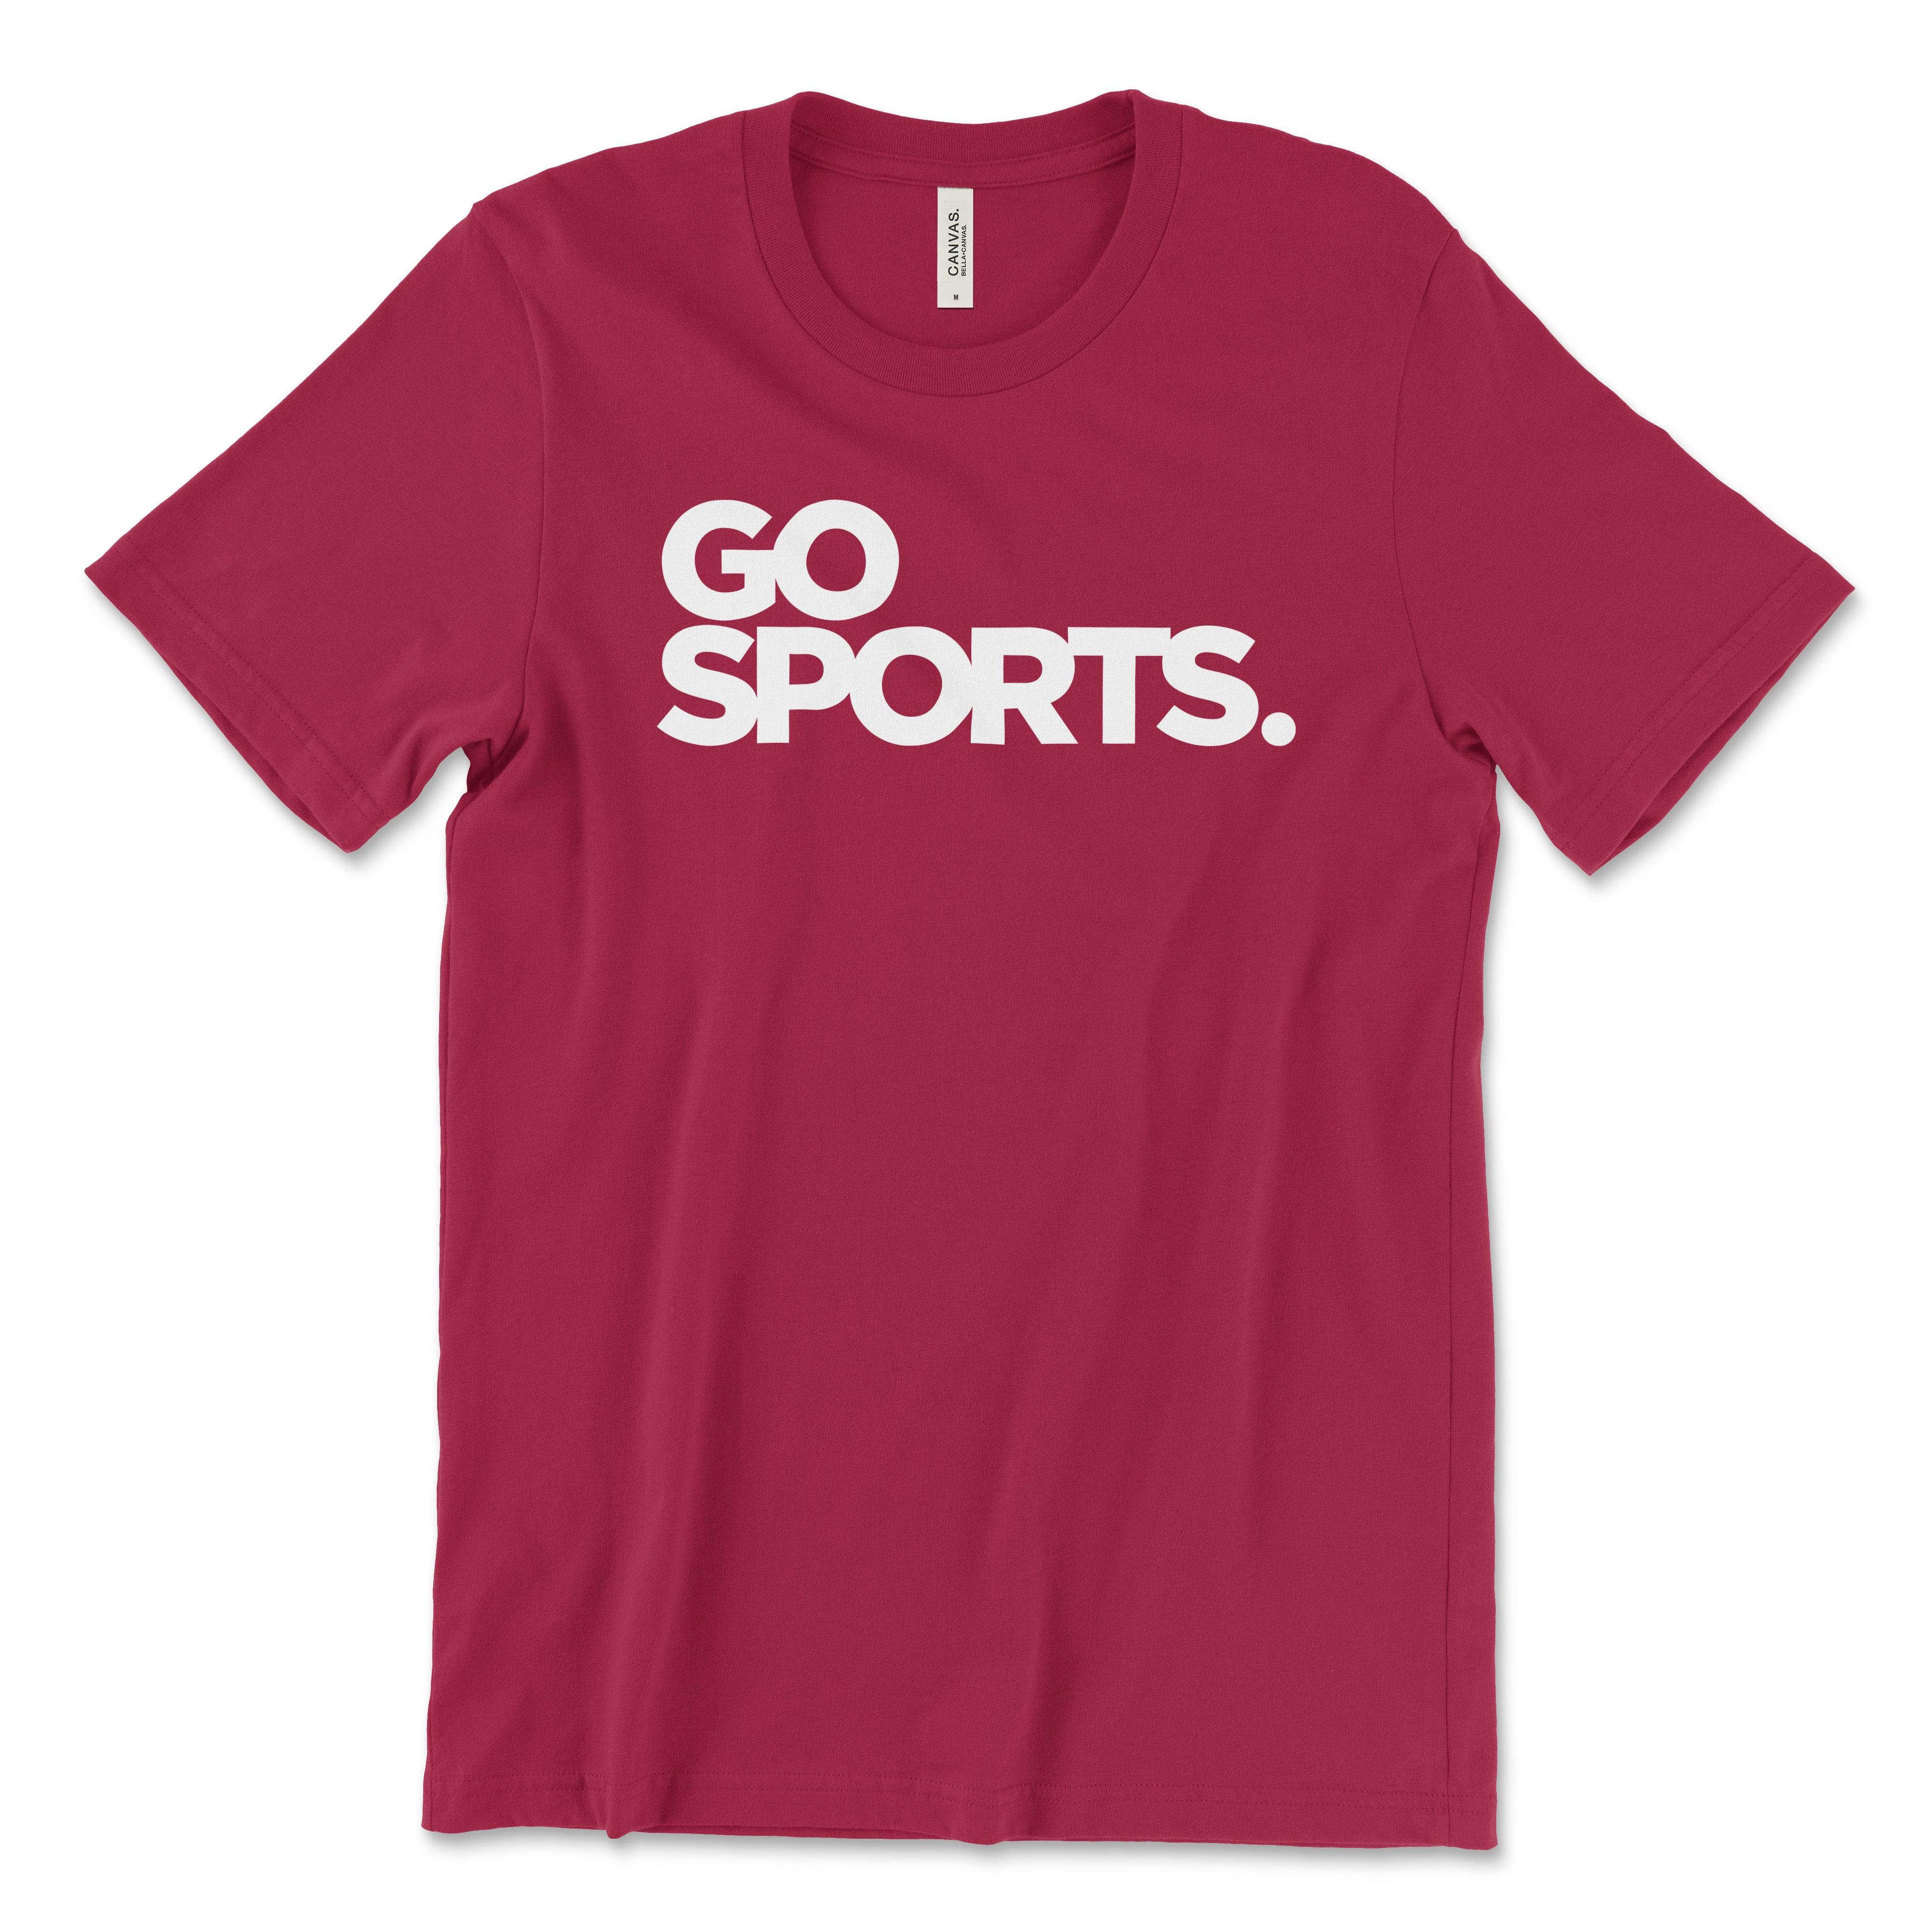 GO SPORTS. Bella Unisex T-Shirt and Crops for Sports Fans – Smack